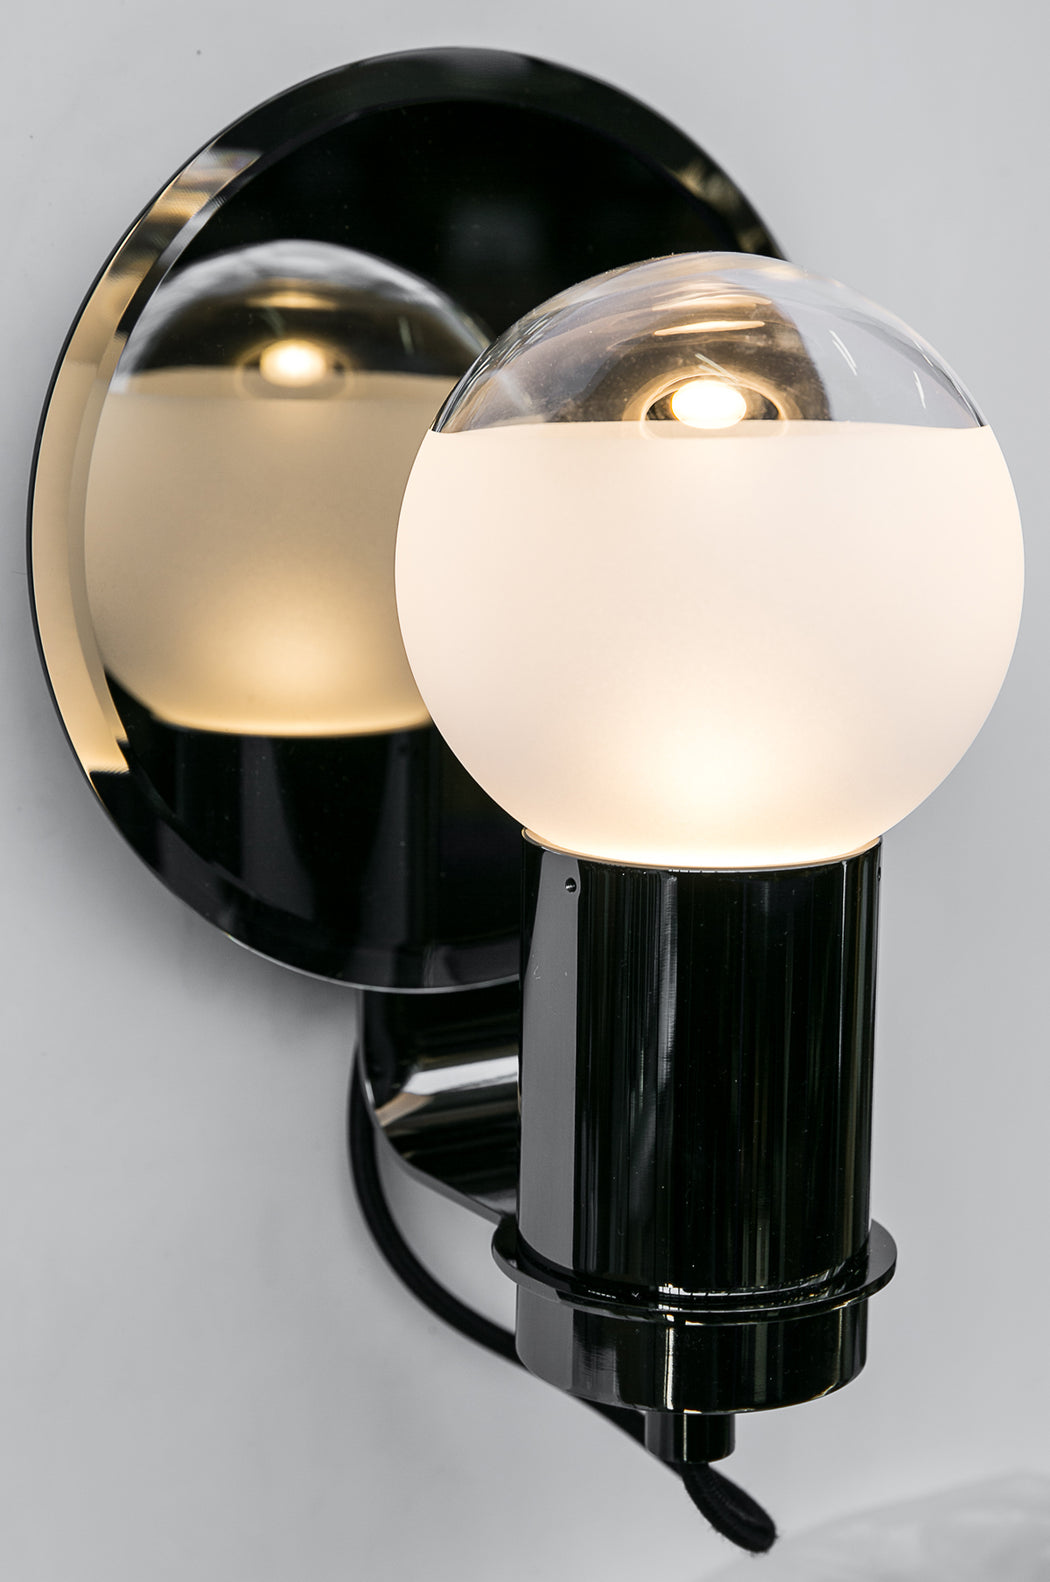 Deluxe Italian wall light with frosted glass diffuser and choice of metal finish